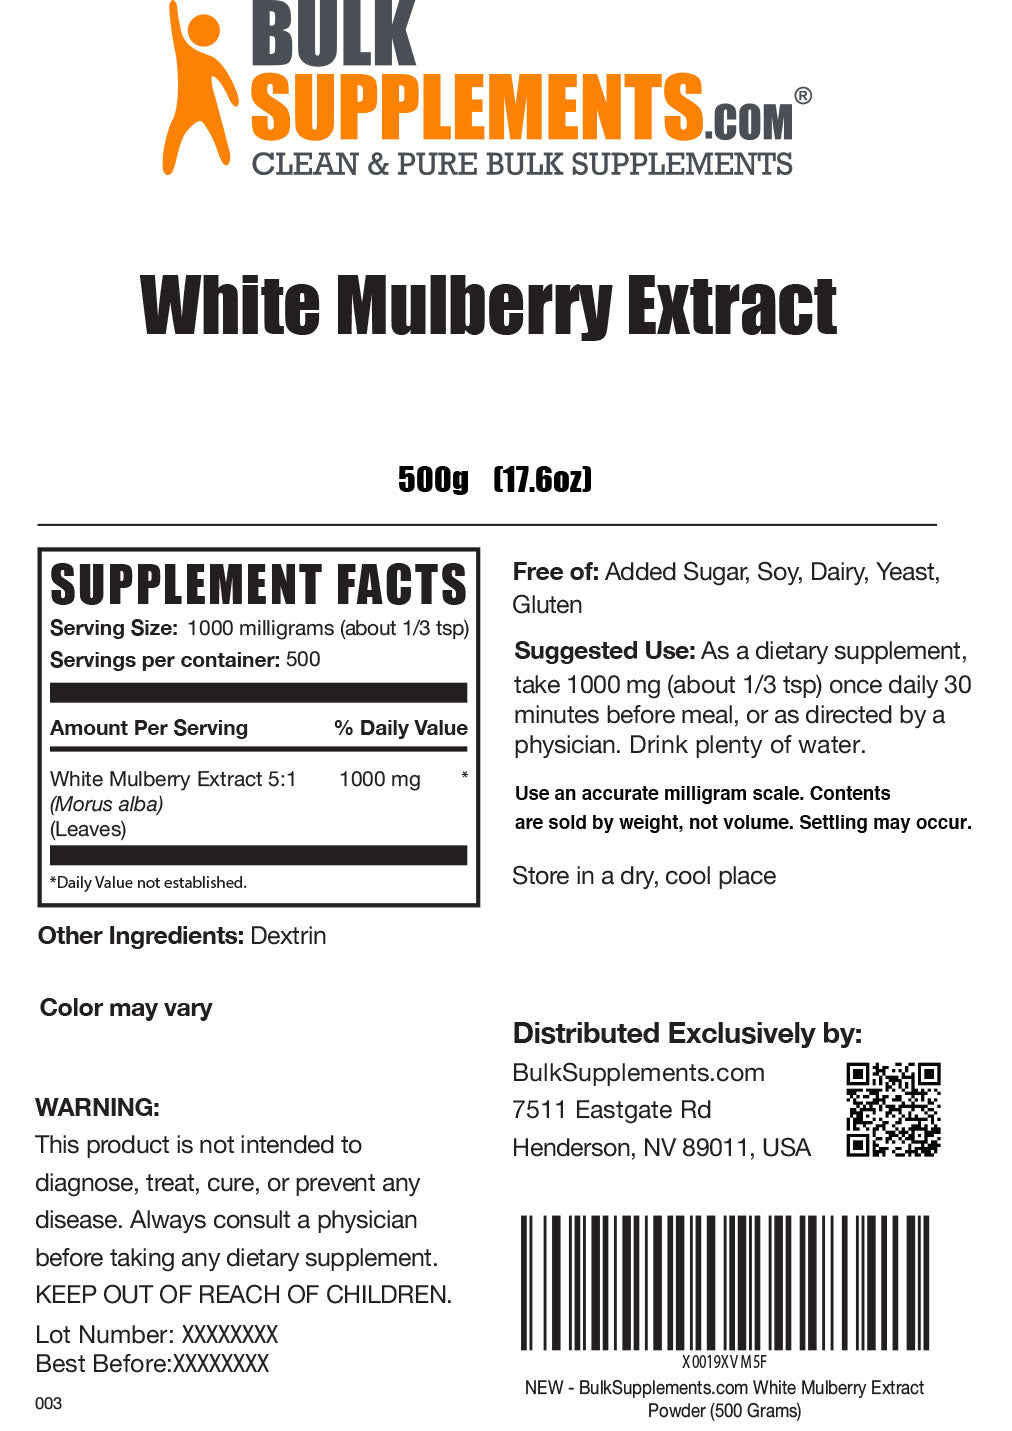 White Mulberry Extract Label 500g